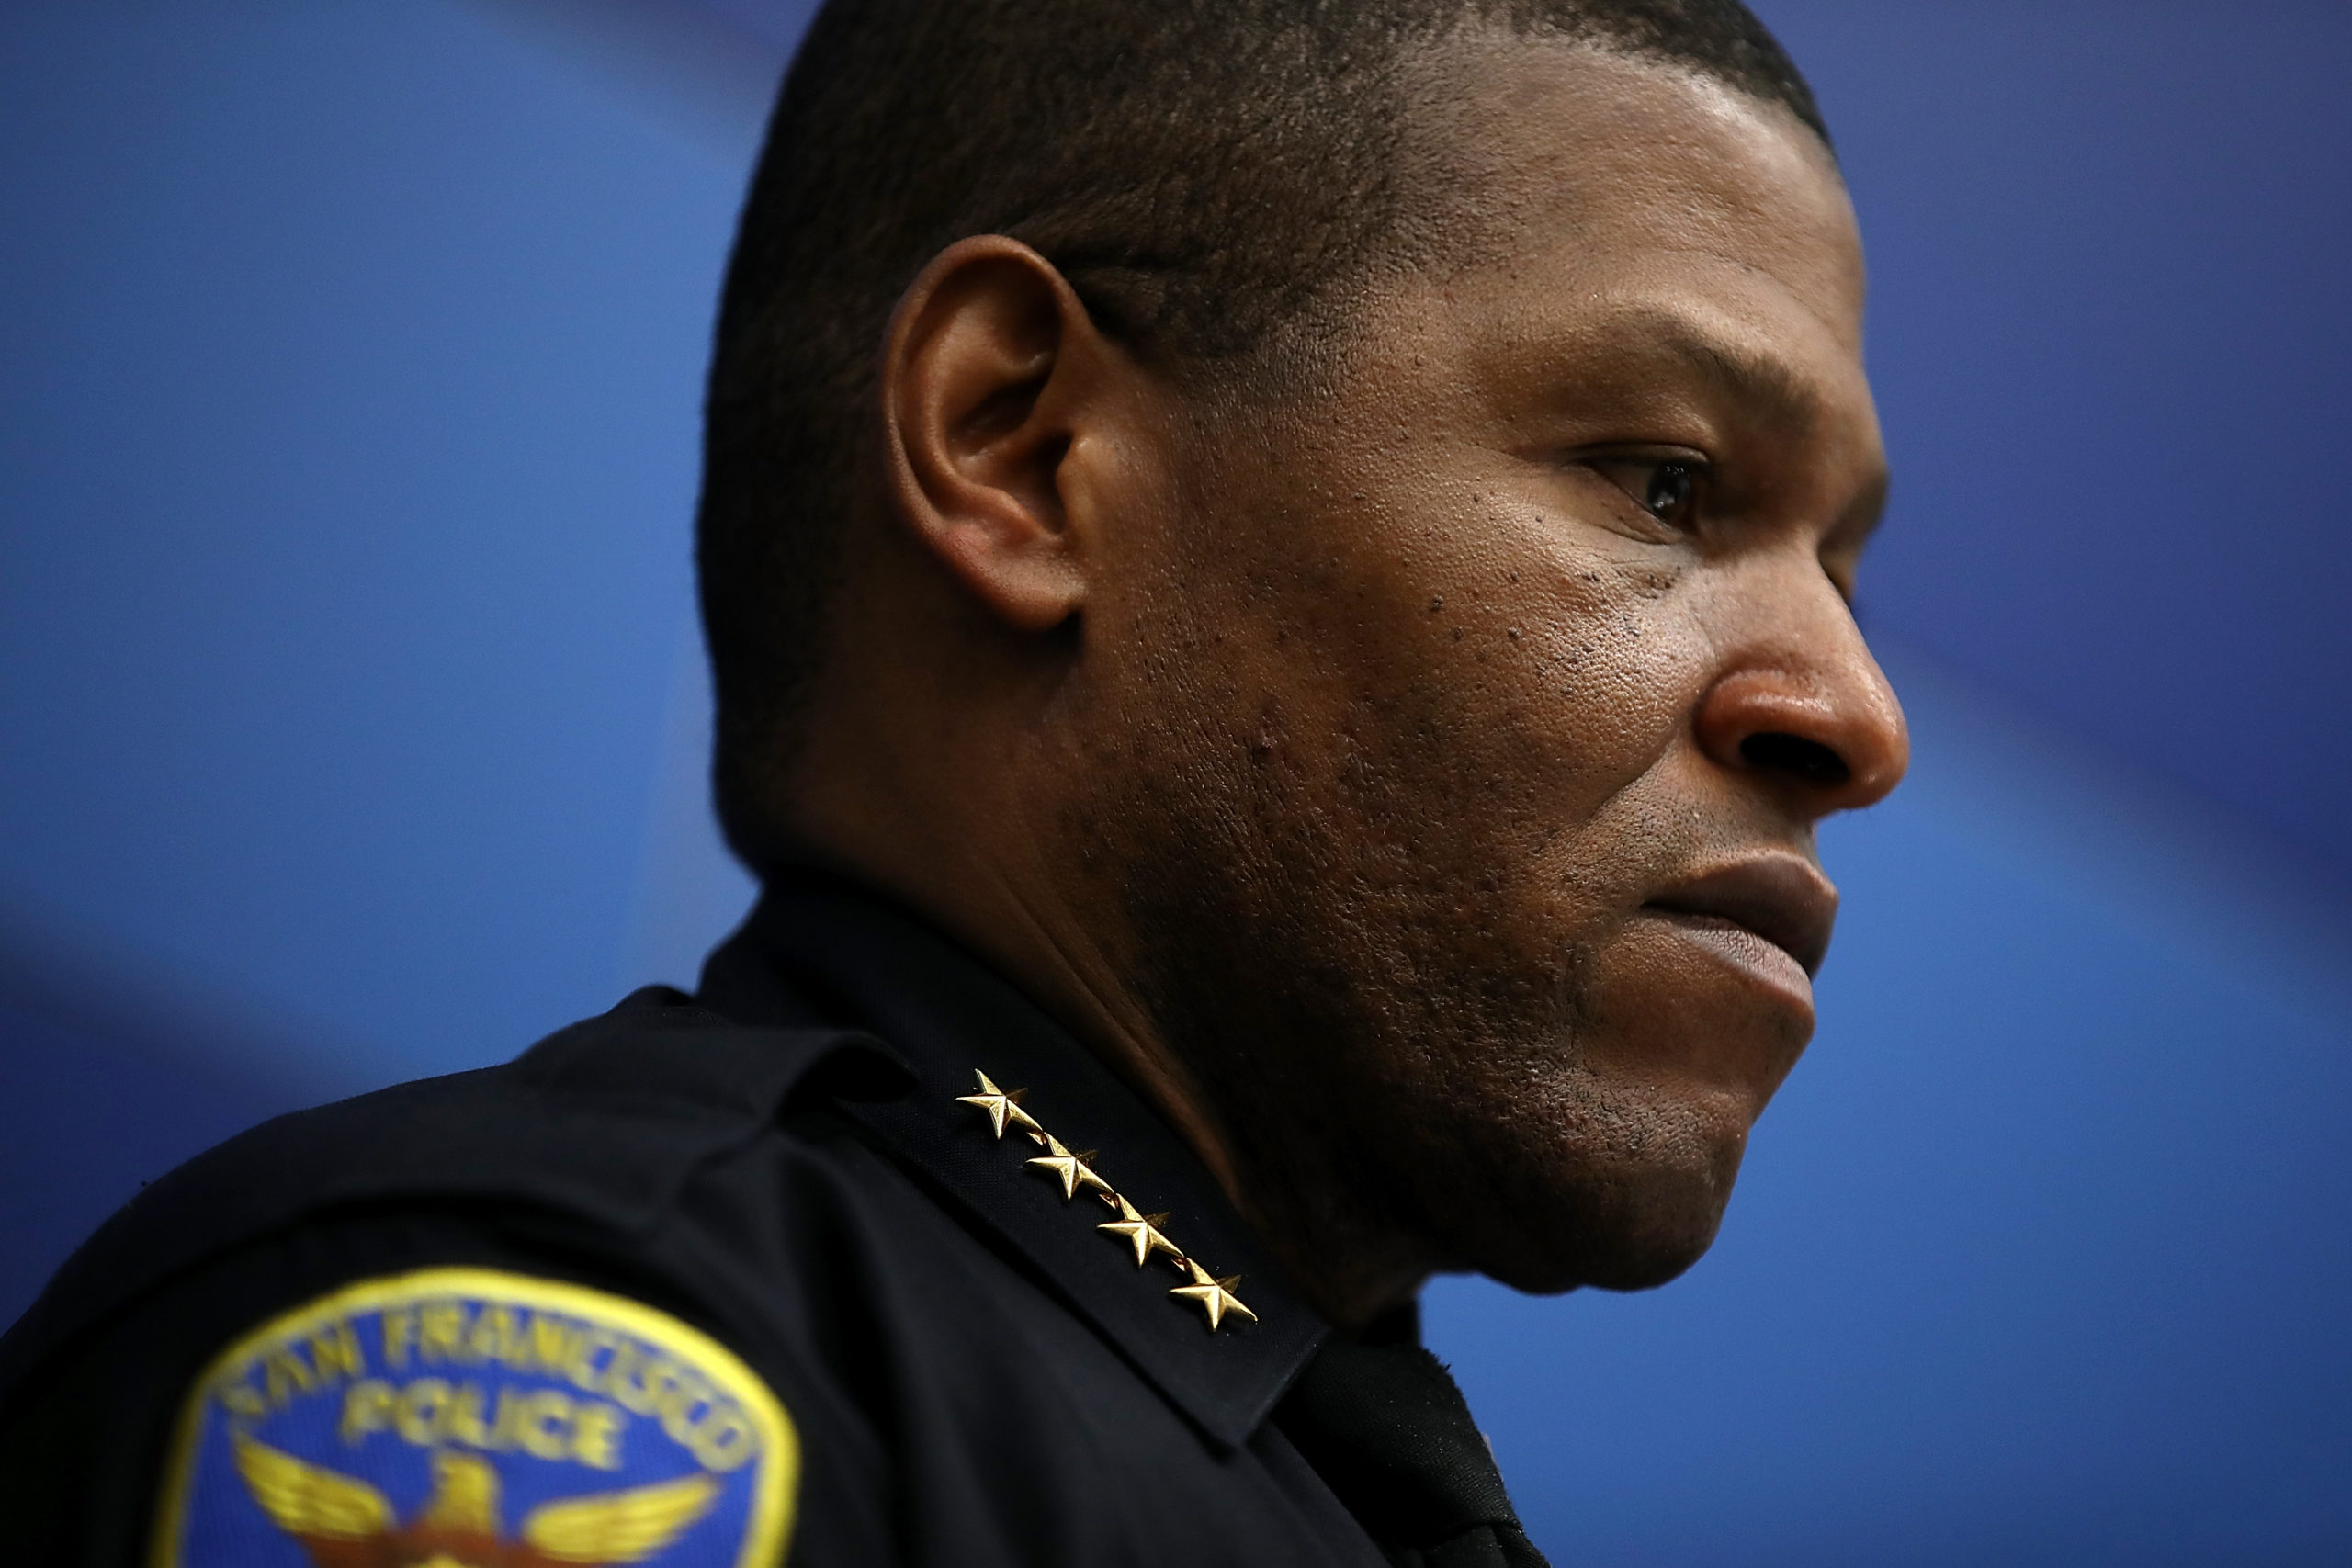 San Francisco Police Chief Will No Longer Release Booking Photos To Avoid Racial Bias Against